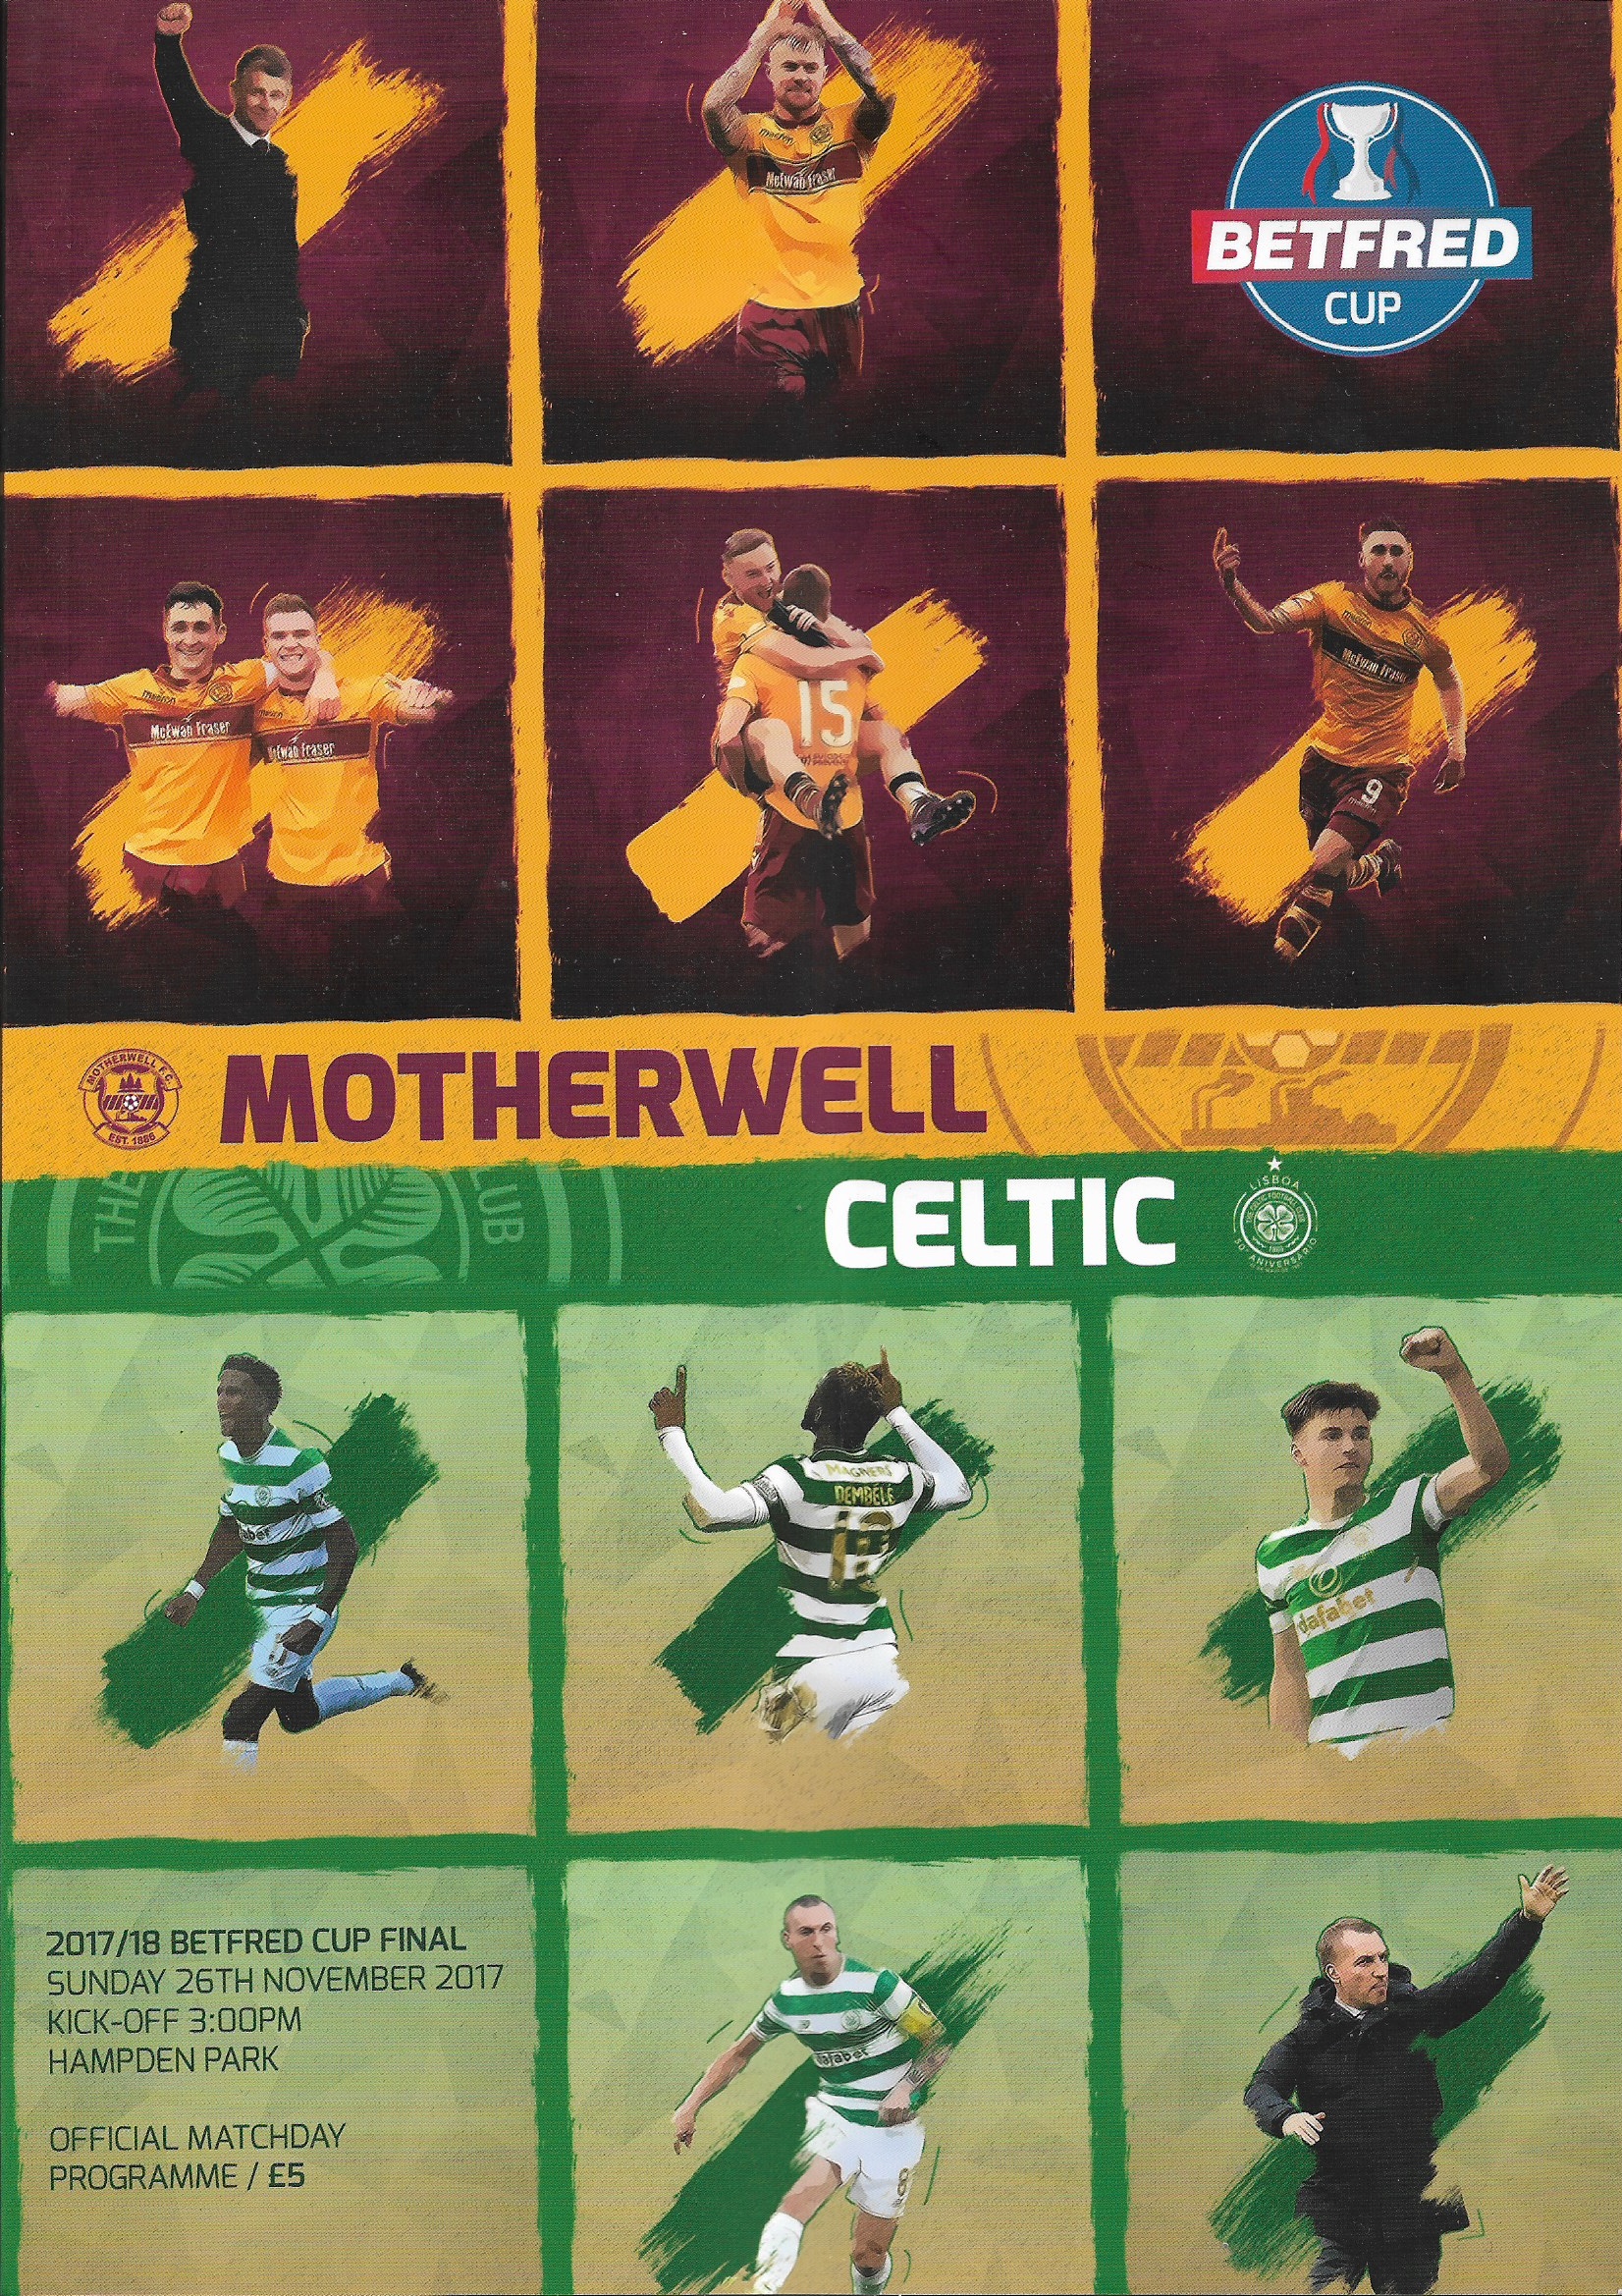 Motherwell vs Celtic - League Cup Final 2017 - Programme Cover